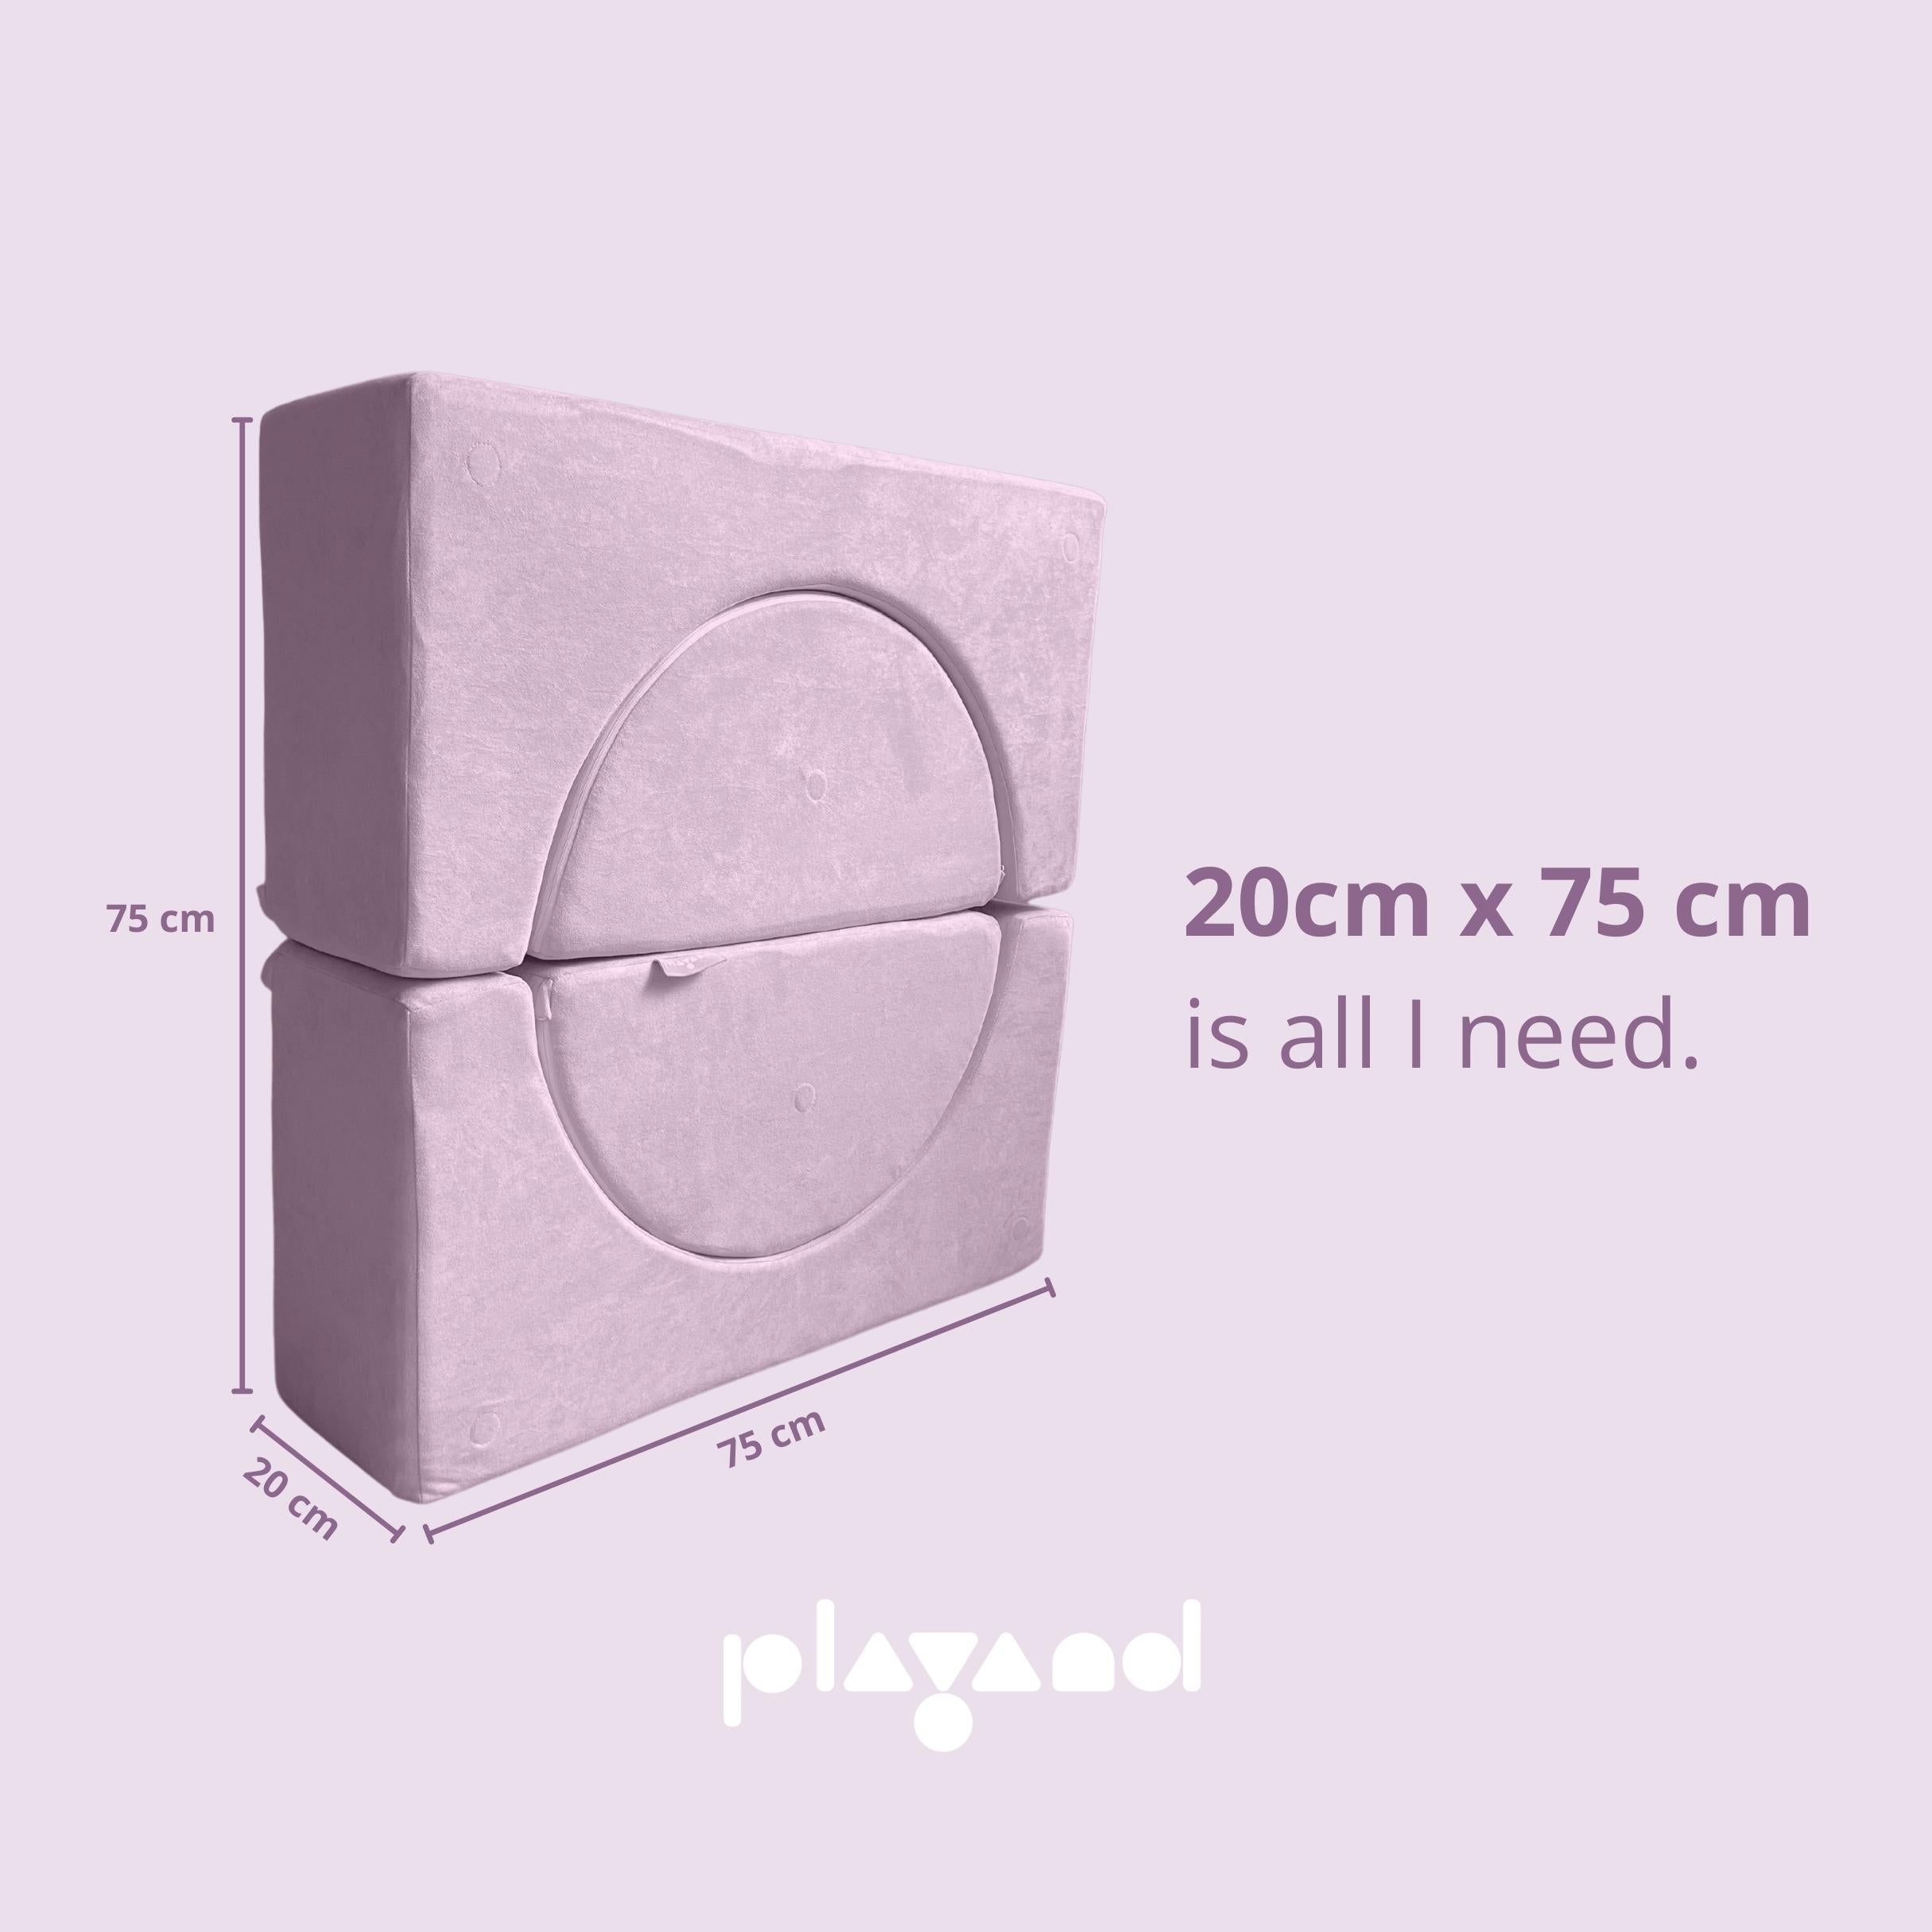 Playand Mini Magnetic In Cool Lavender